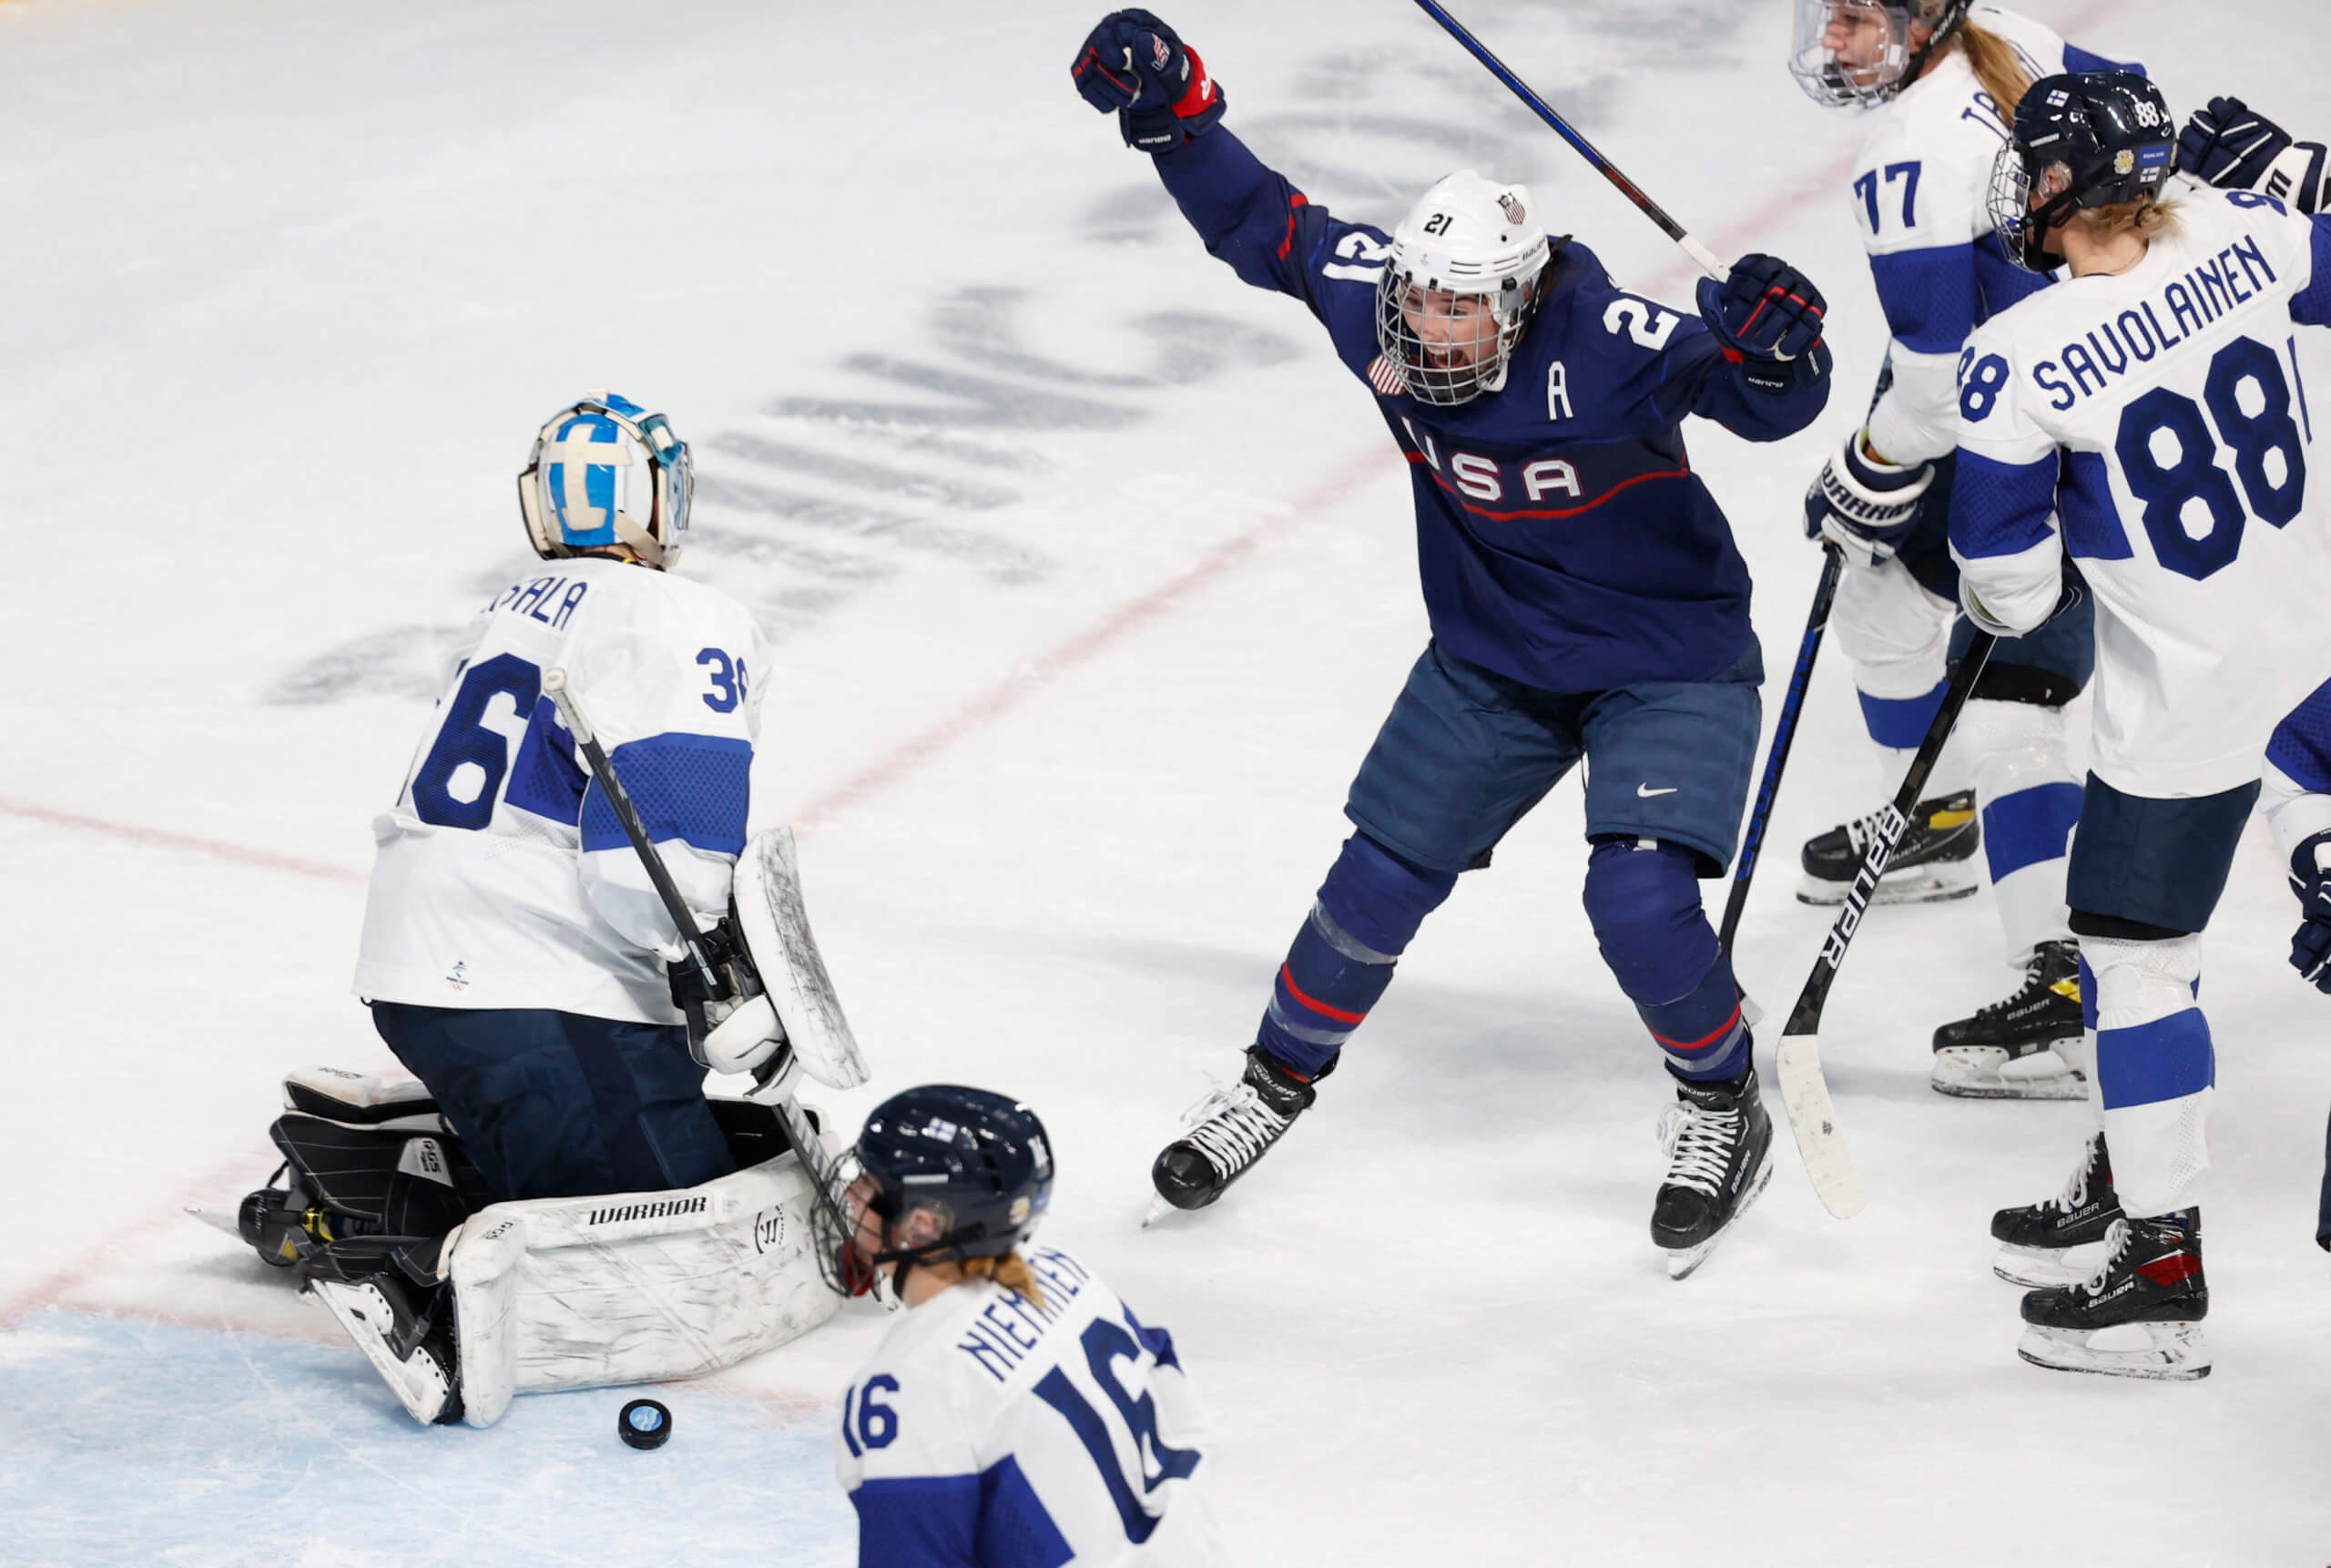 Winter Olympics Hockey Schedule, How To Watch, Channels,